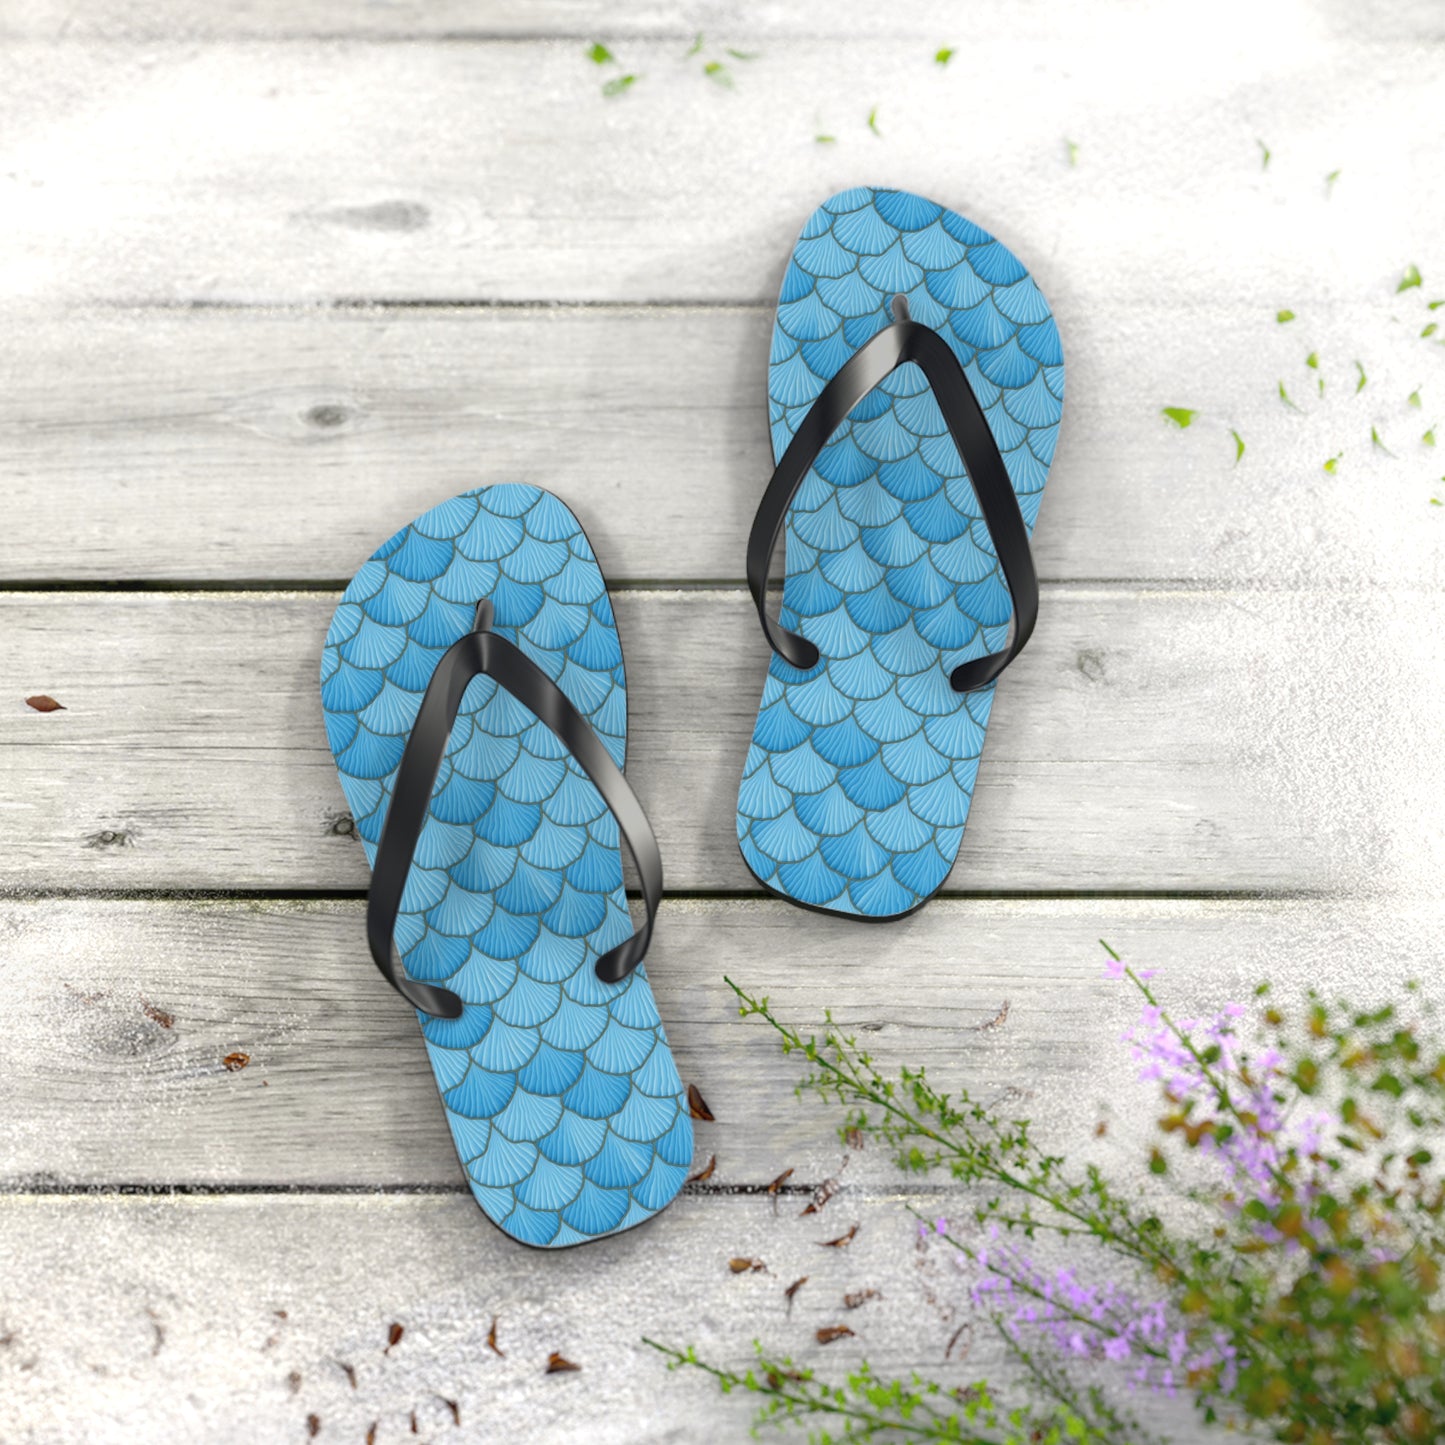 Get Your Flip Flop Game On - Stand Out with Custom Blue Seashell Mermaid Flip Flops! Beach, Home, Work School Fun